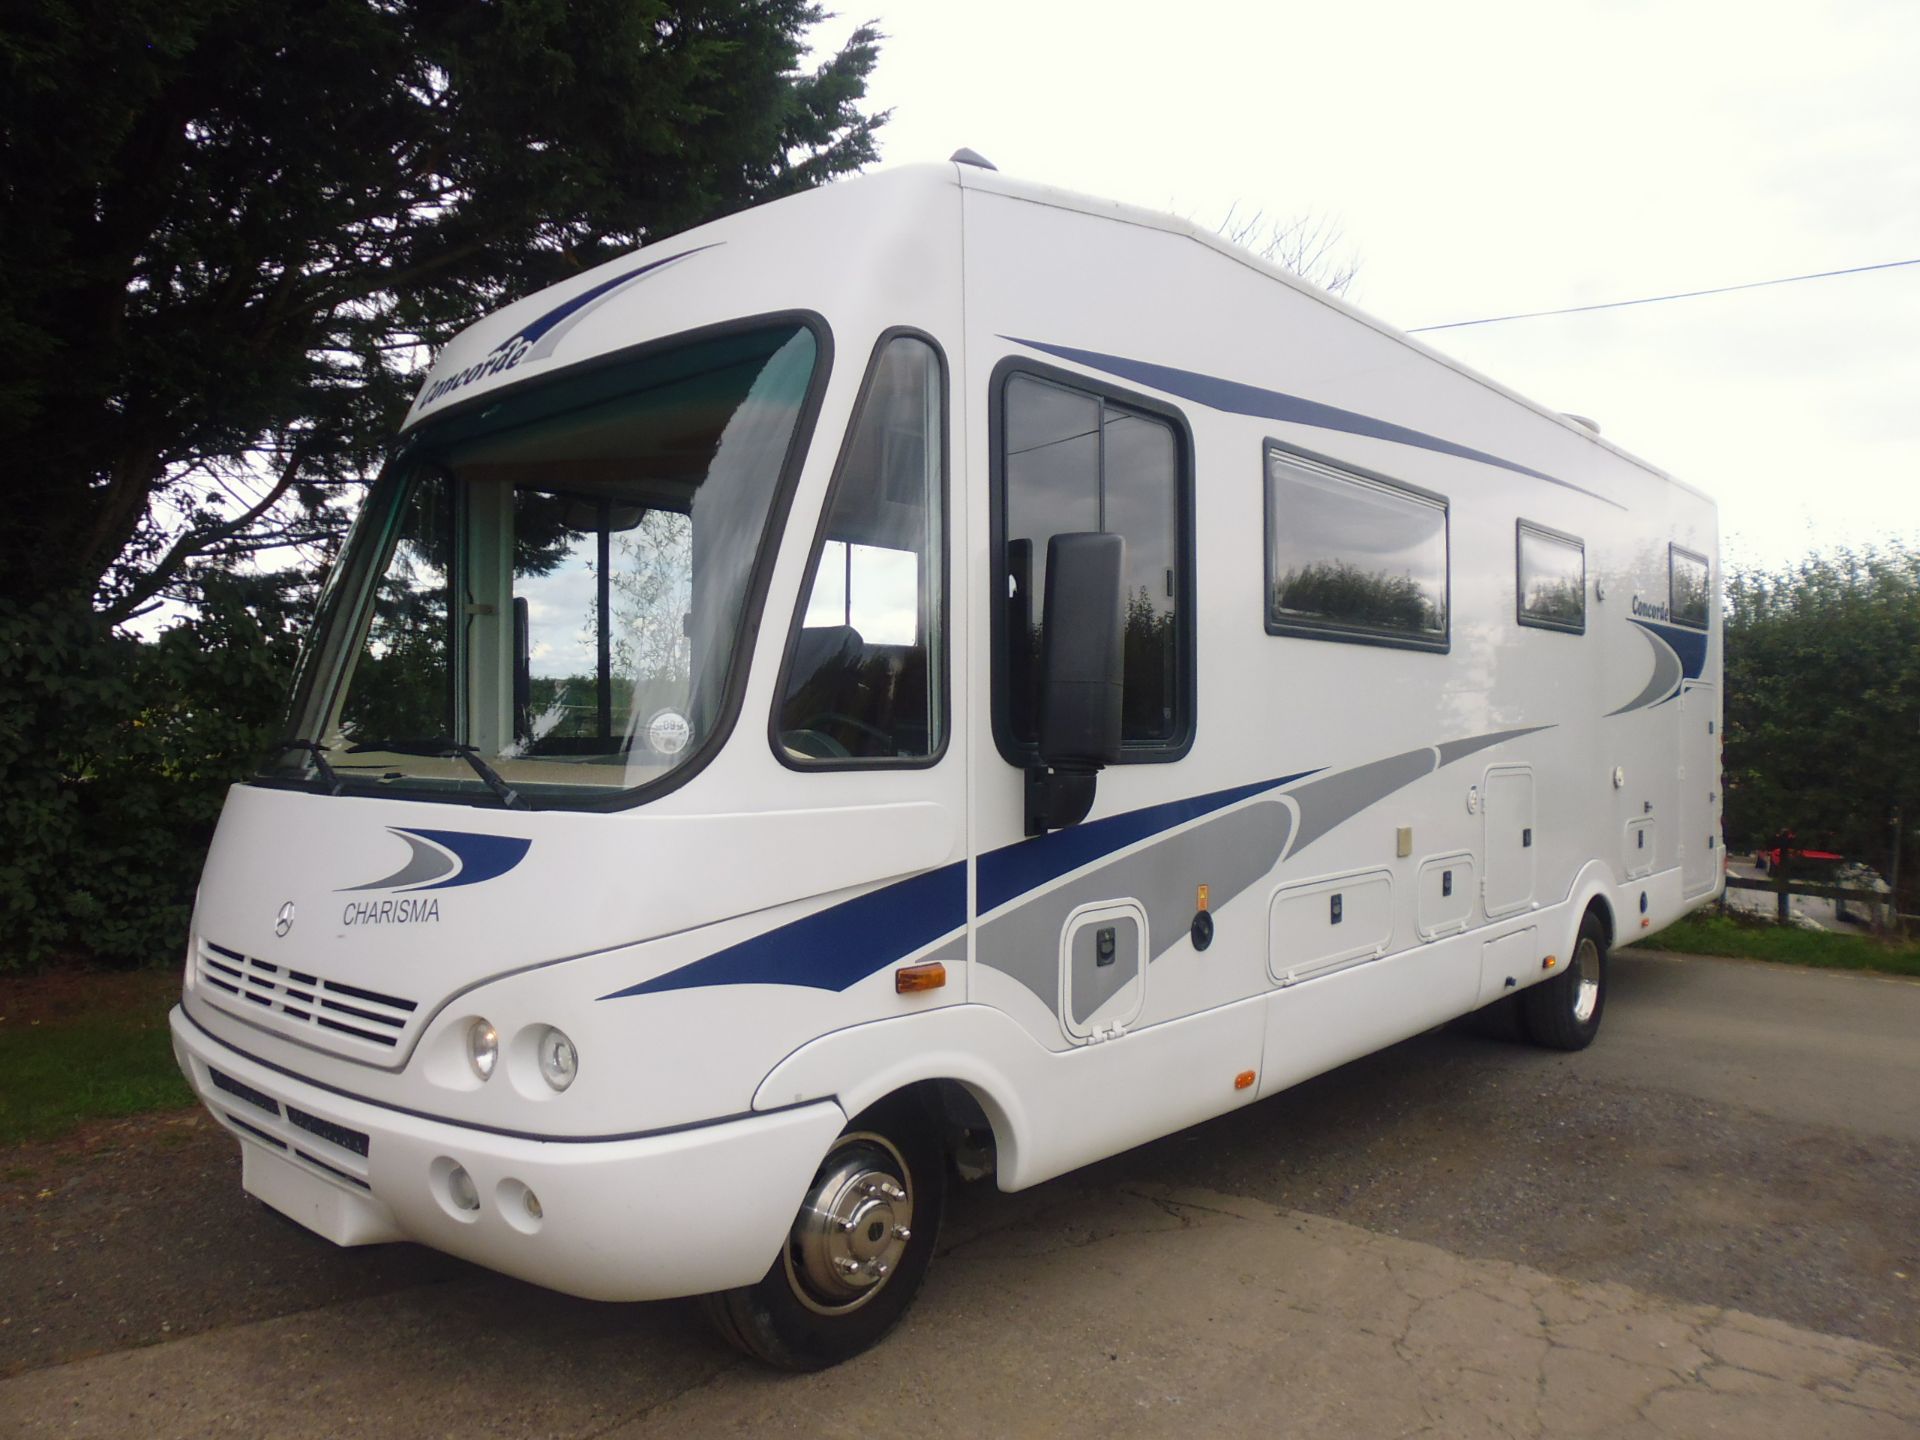 MERCEDES CONCORDE CHARISMA I880F AUTOMATIC A CLASS LUXURY MOTORHOME RV *NO VAT* - Image 2 of 20